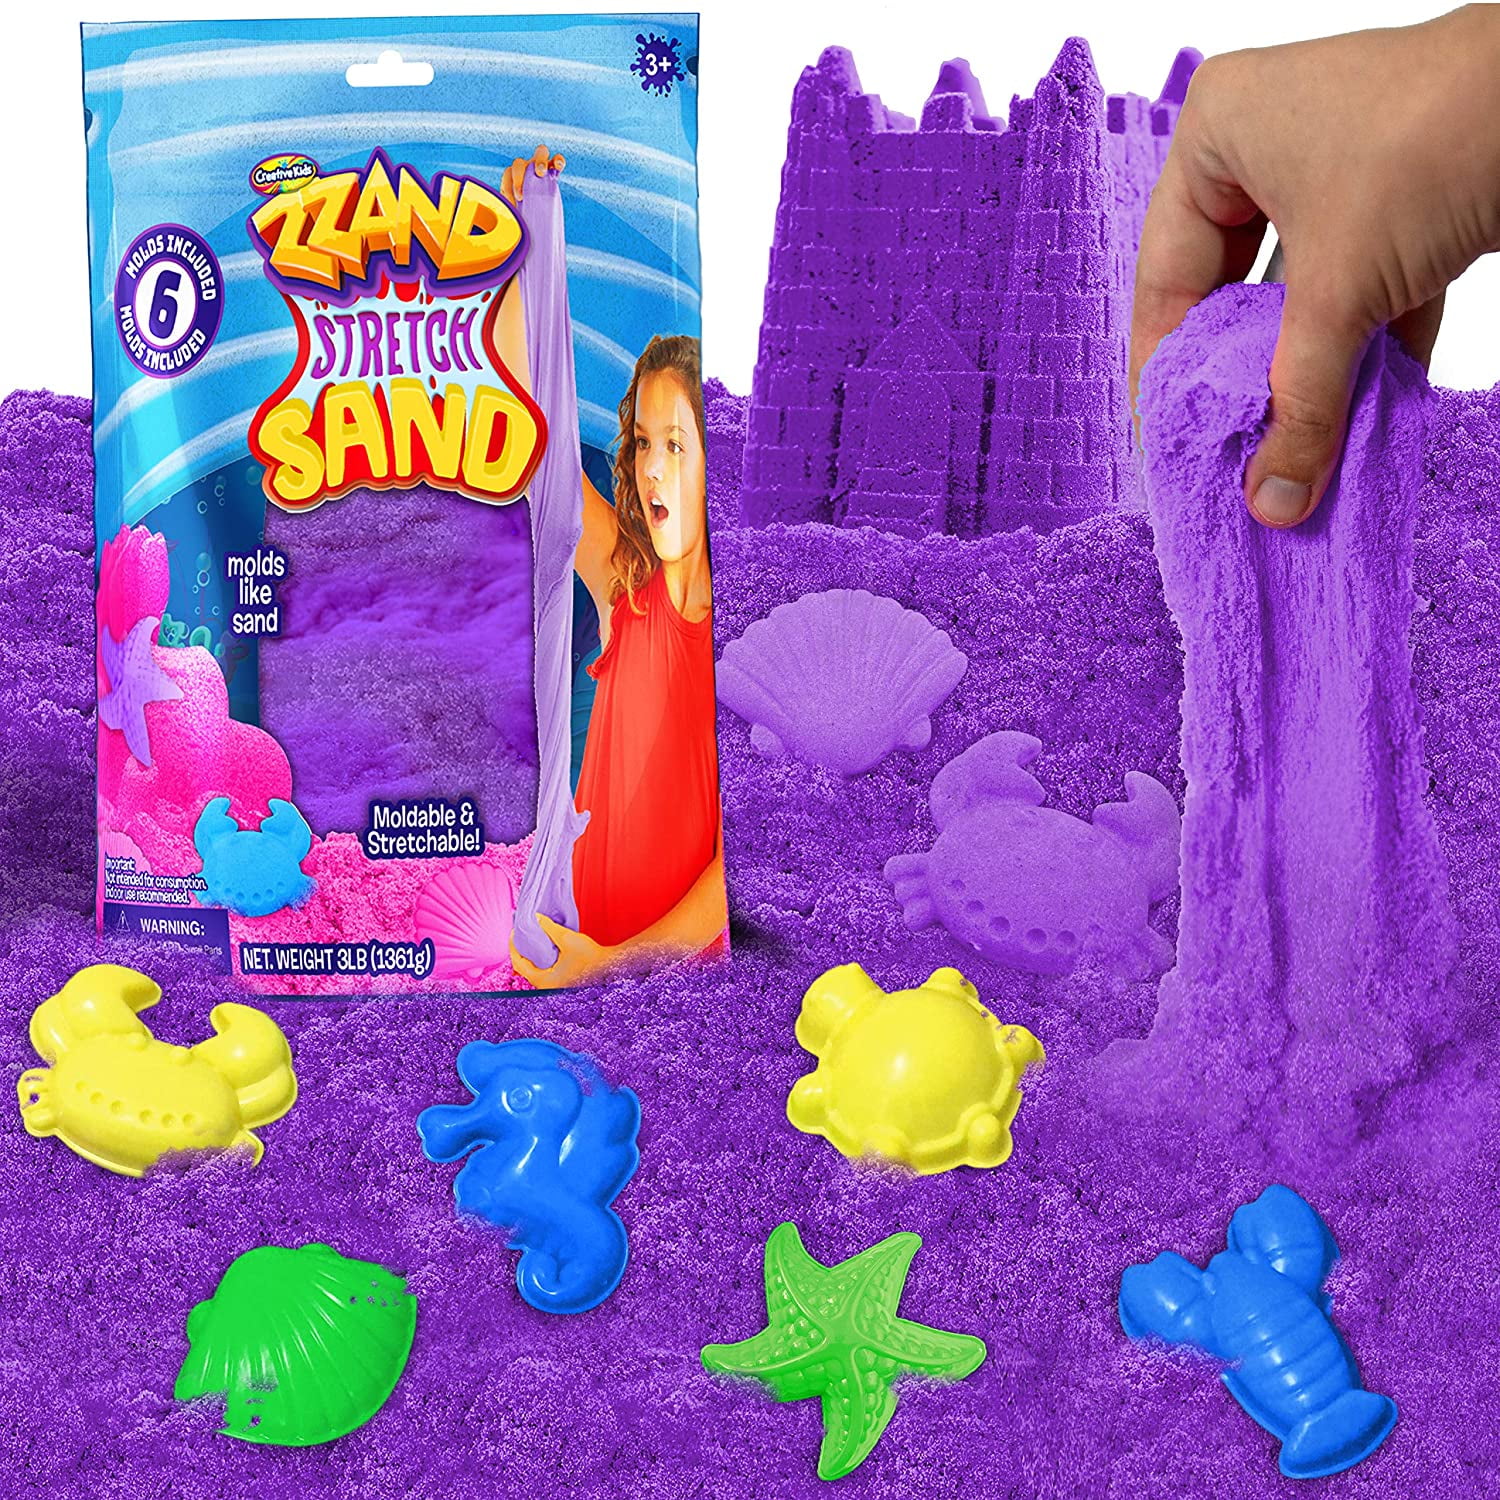 JA-RU Wonder Sand - Moldable Sand Toy Kit (12 Sand Packs Assorted Color)  Therapy Sensory Toy Colored Sand for Kids and Adults. Cool Indoor & Outdoor